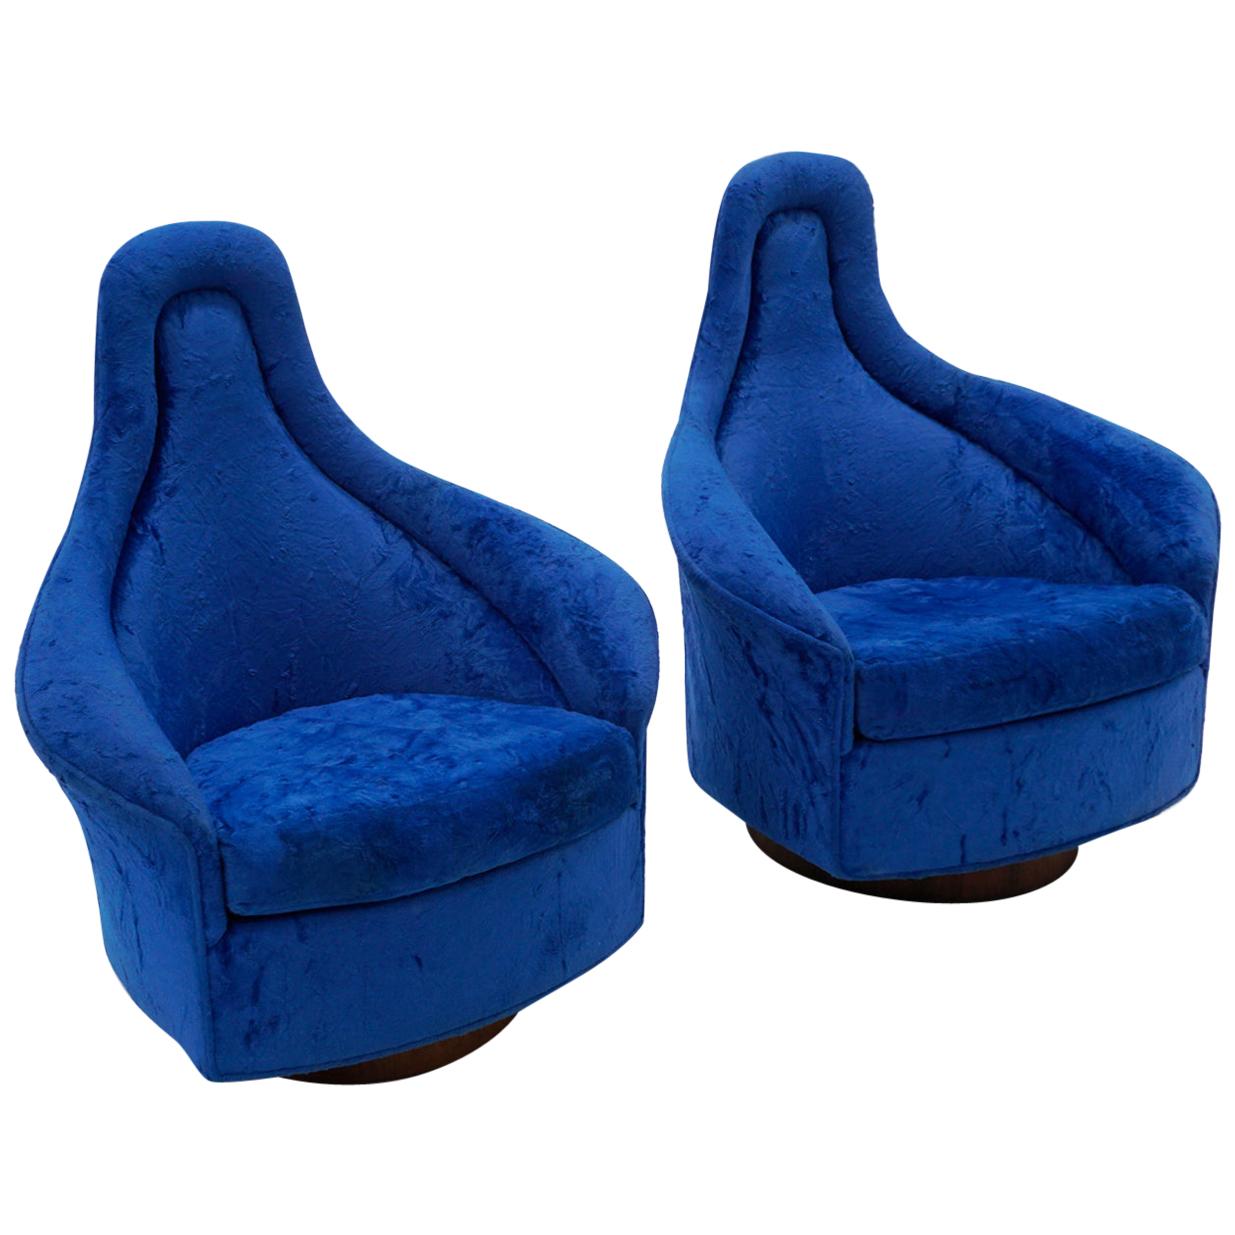 Pair of Swivel Lounge Chairs in the Original Blue Velvet, Adrian Pearsall Signed